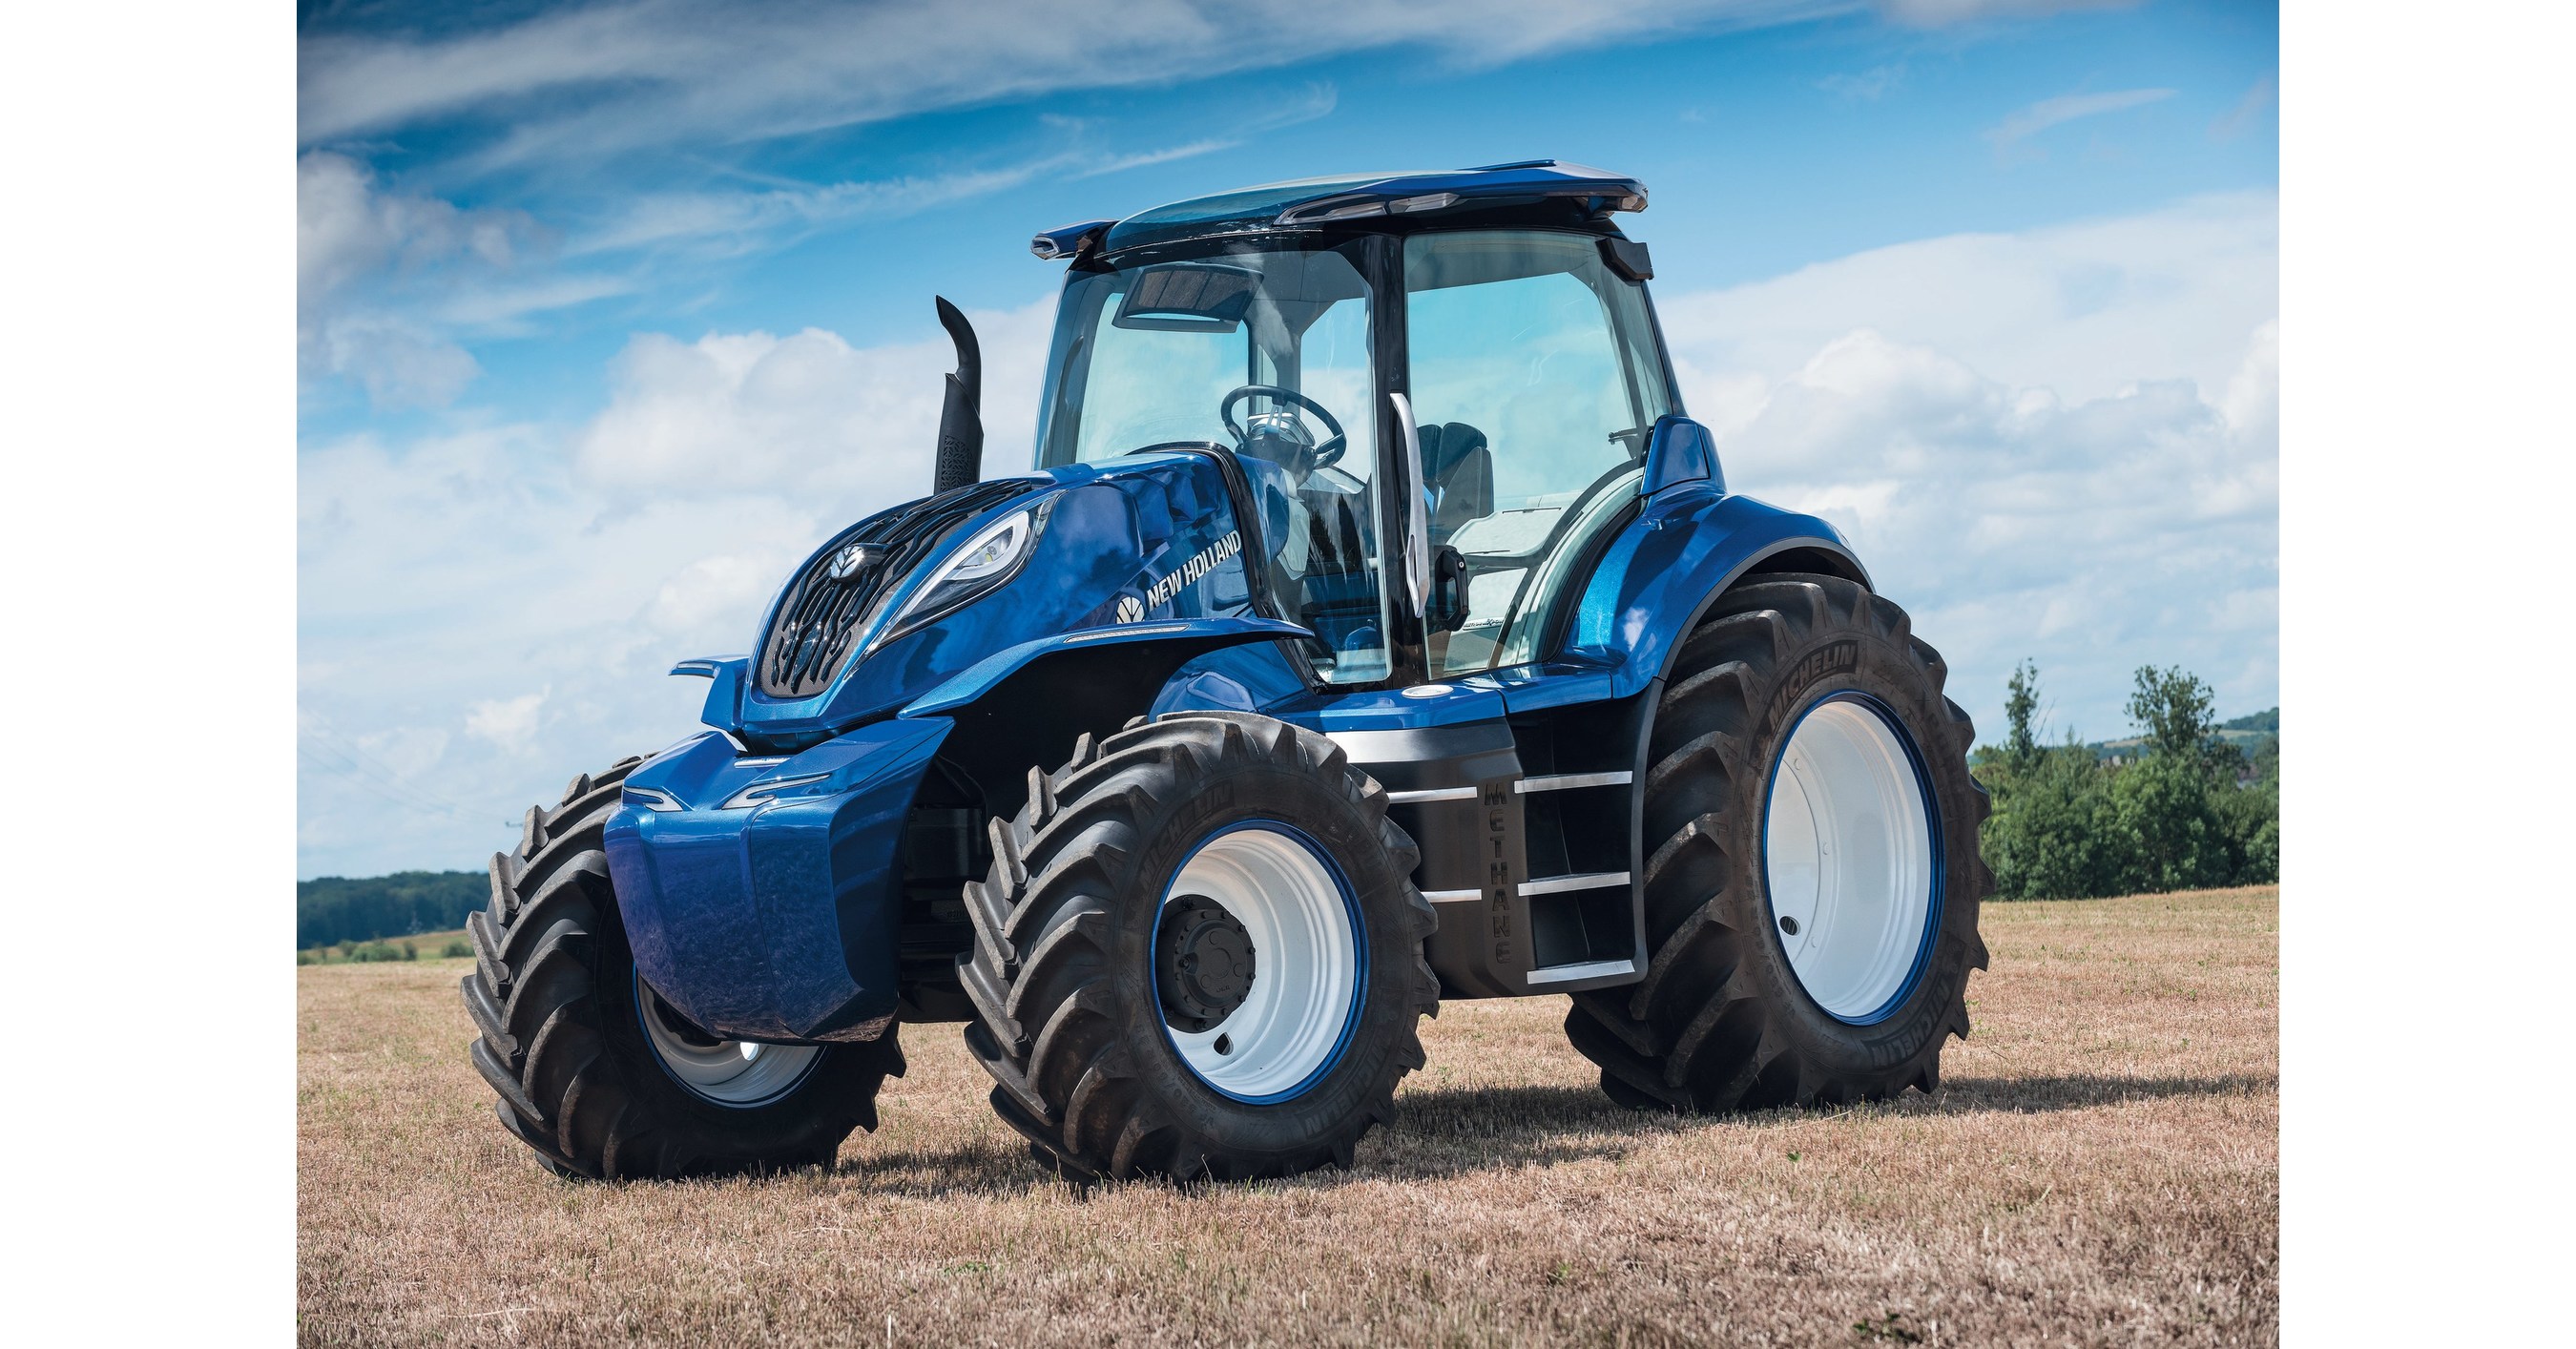 New holland цена. New Holland Agriculture трактор. Трактор New Holland t6090. Трактор колесный New Holland t9030. Нью Холланд трактор 9040.